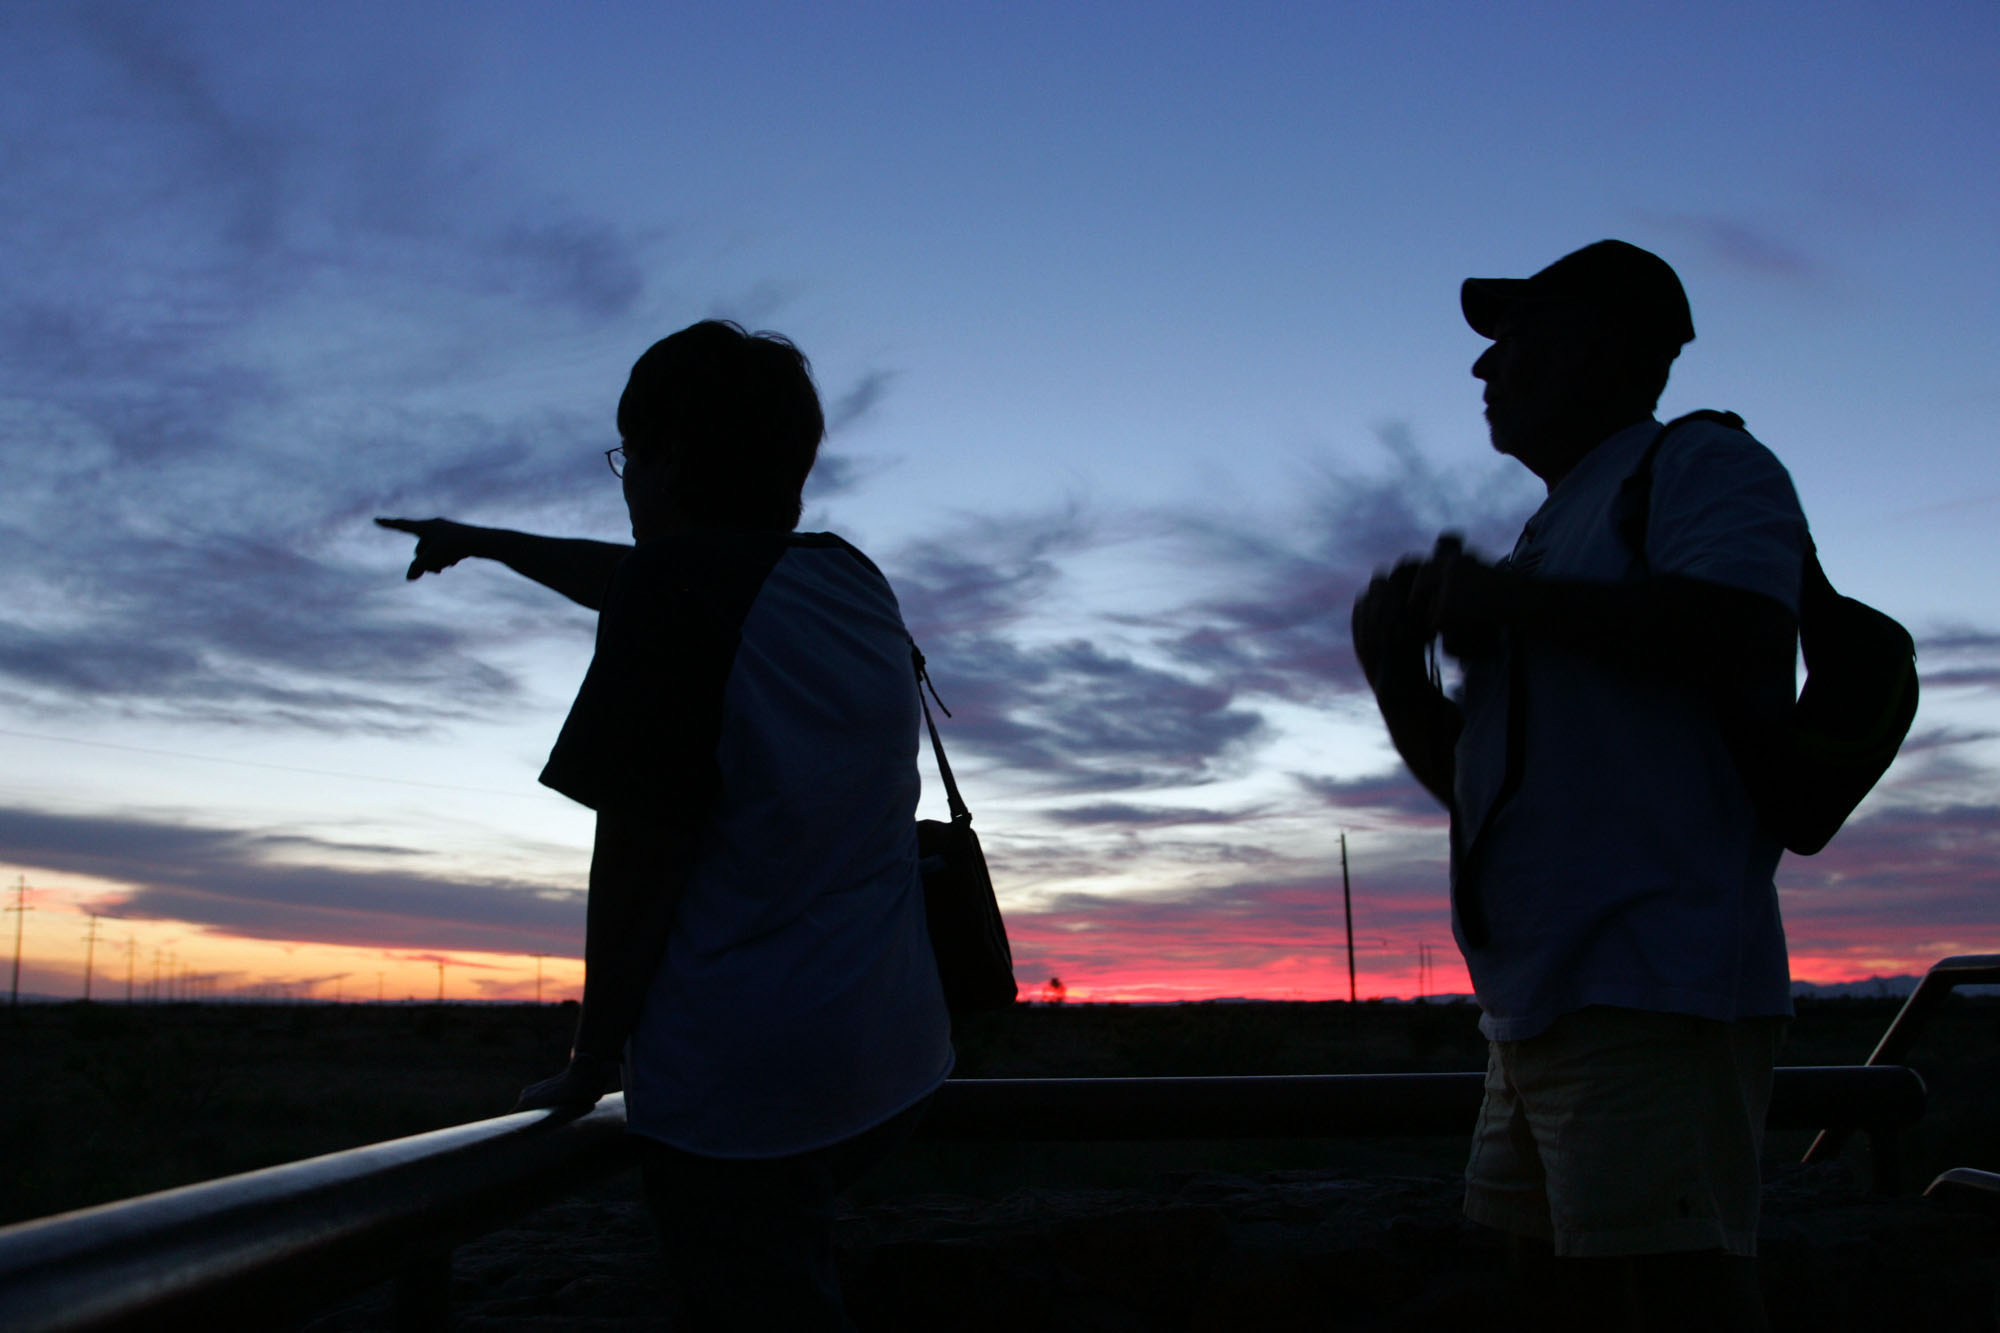 Fern Teems, left, points to what she believes may be one of the mystery lights near Marfa, Texas, as her husband James Teems looks on. Both are silhouetted against a blue, purple, and vibrant red sunset sky.